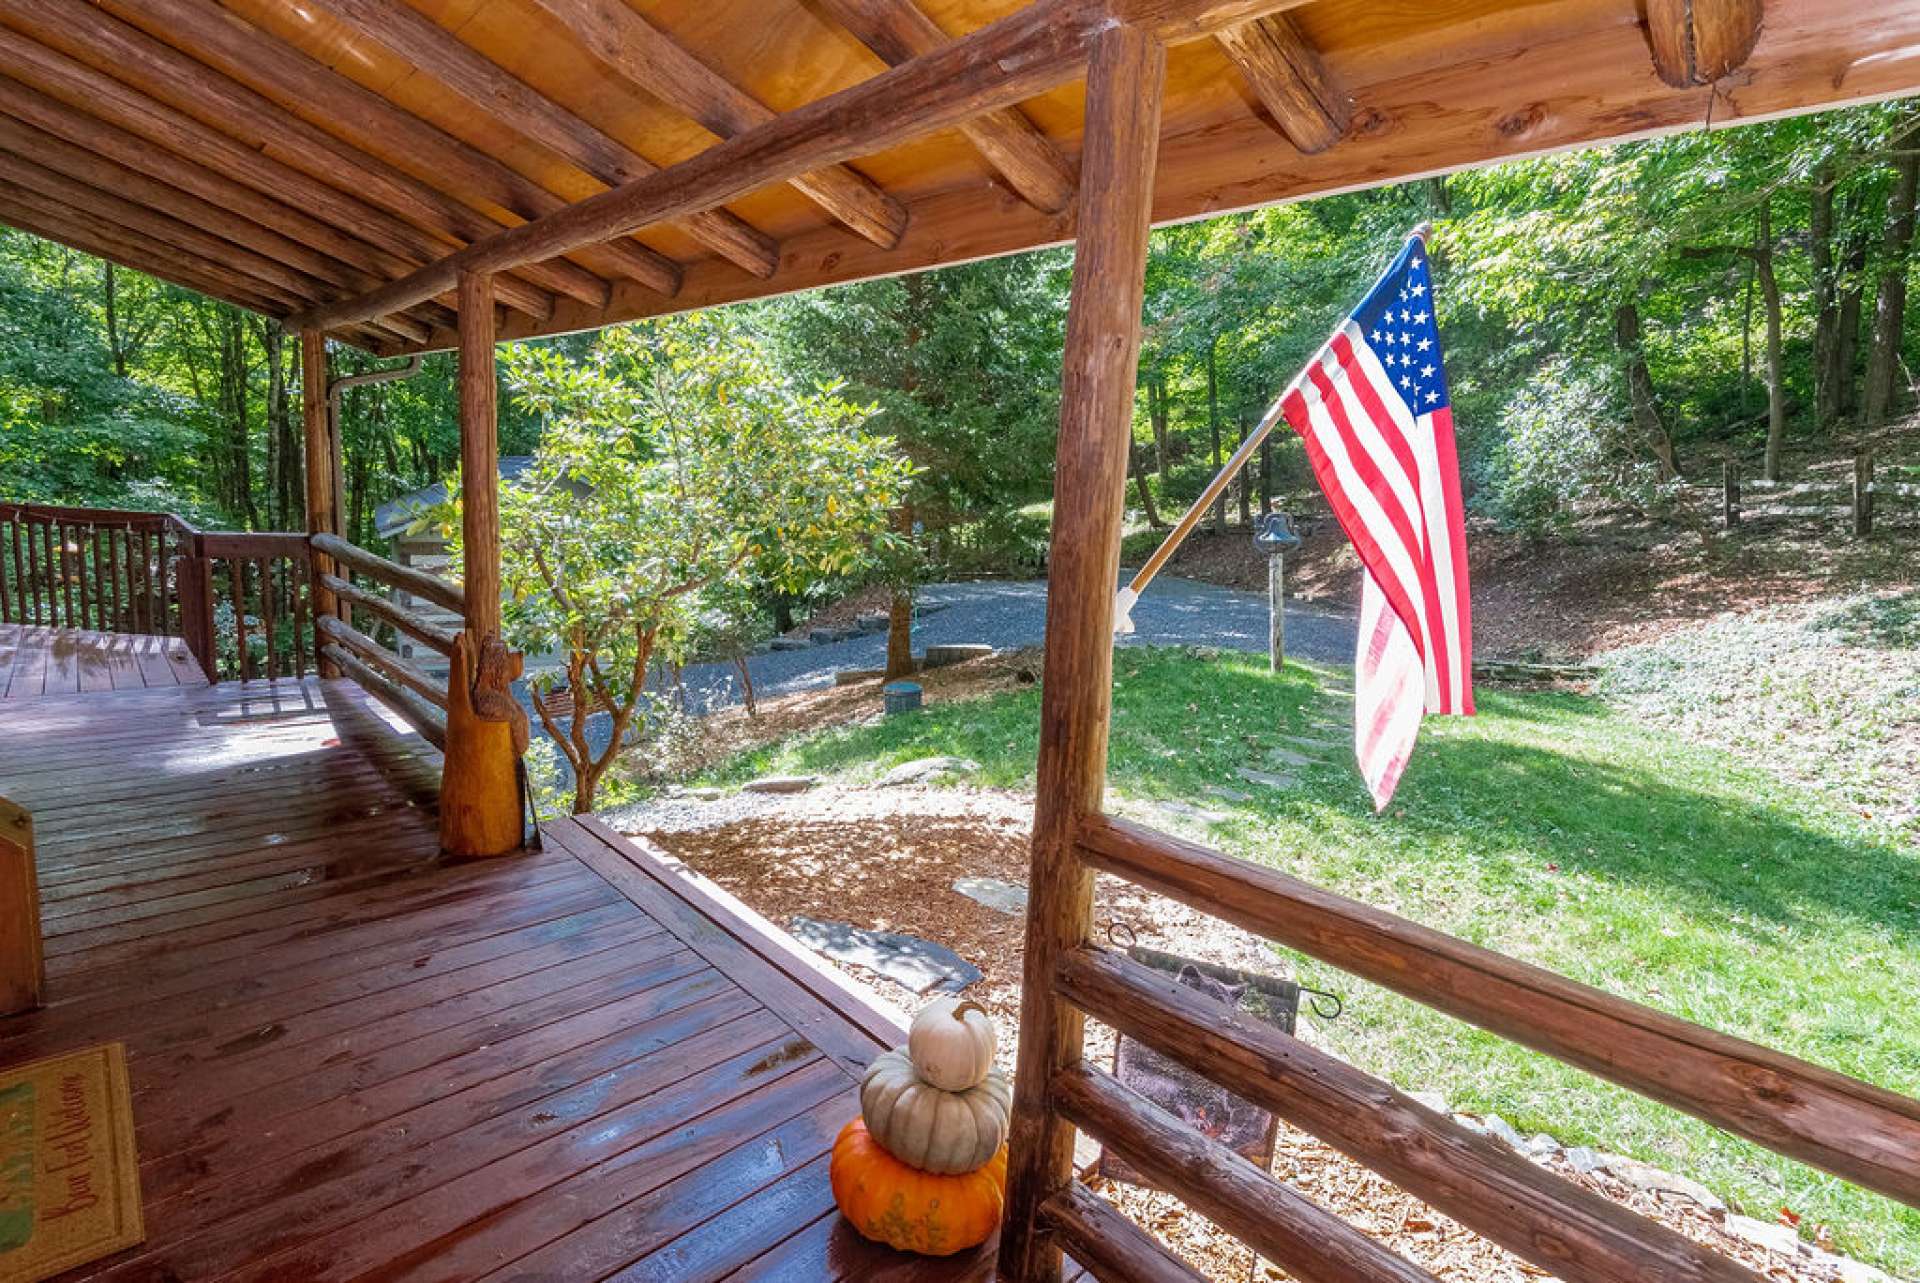 A covered front porch welcomes you and guests to enjoy true log cabin living.  From your front porch swing, all you see and hear is Nature's beauty.